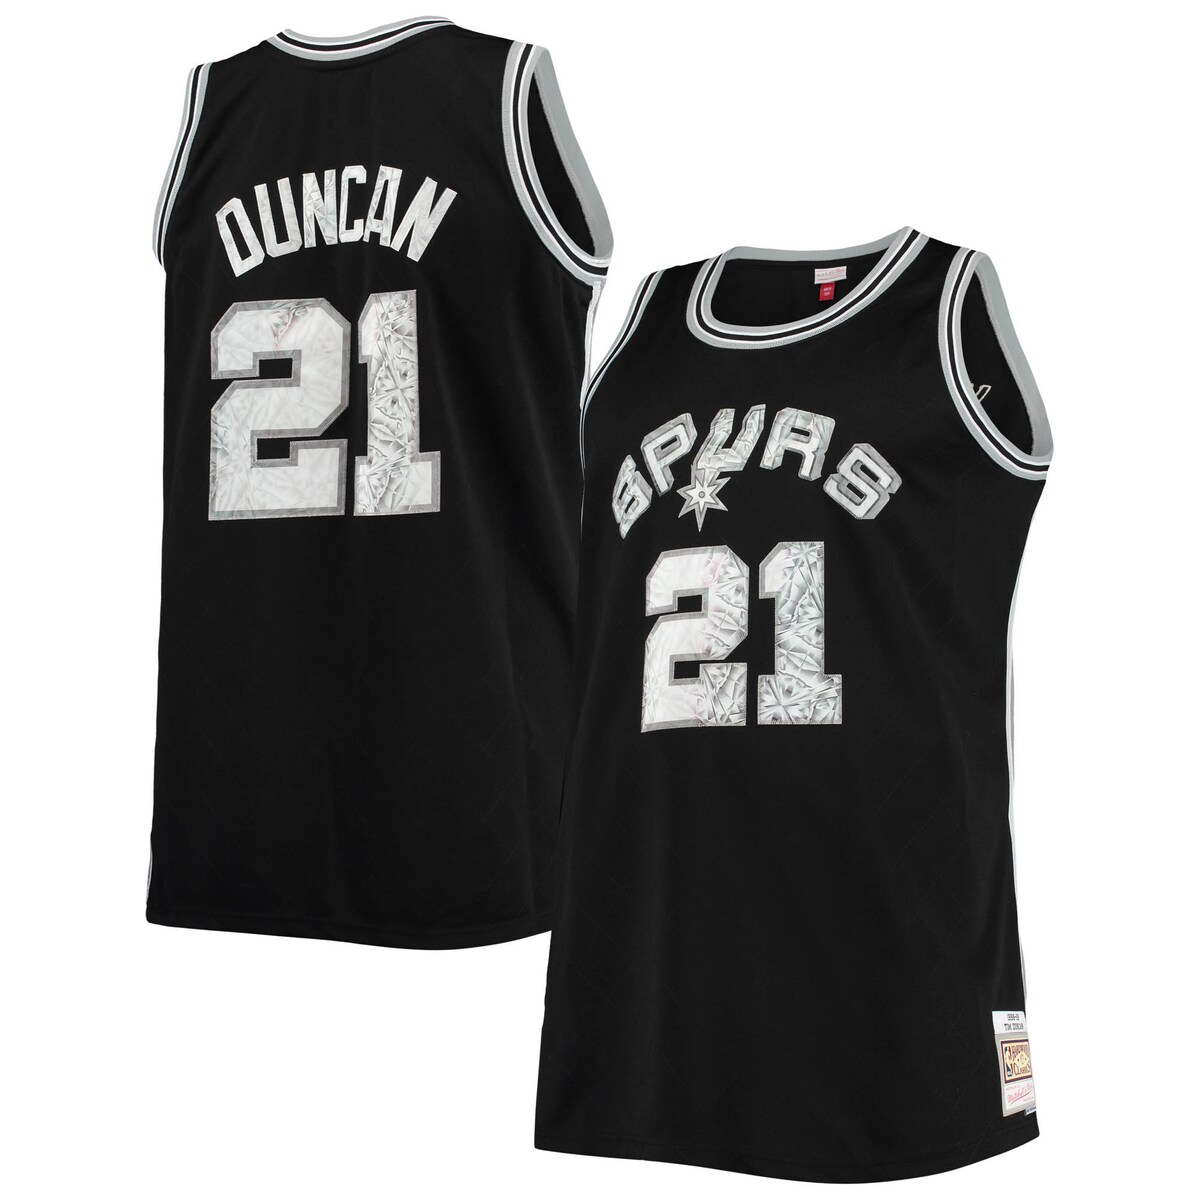 Commemorate the iconic legacy of Tim Duncan while celebrating 75 years of illustrious NBA insanity with this San Antonio Spurs Diamond Swingman jersey from Mitchell & Ness. Along with a sleeveless design, this top offers lightweight fabric to keep you fresh throughout the day. Featuring legendary San Antonio Spurs and Tim Duncan graphics, this is the perfect way to show your timeless devotion to your favorite team and player in the NBA.Swingman ThrowbackStitched holographic applique with faux diamond patternWoven jock tag at hemBrand: Mitchell & NessImportedOfficially licensedStitched designMaterial: 100% PolyesterMachine wash, line dryStraight hemline with side splitsSleeveless